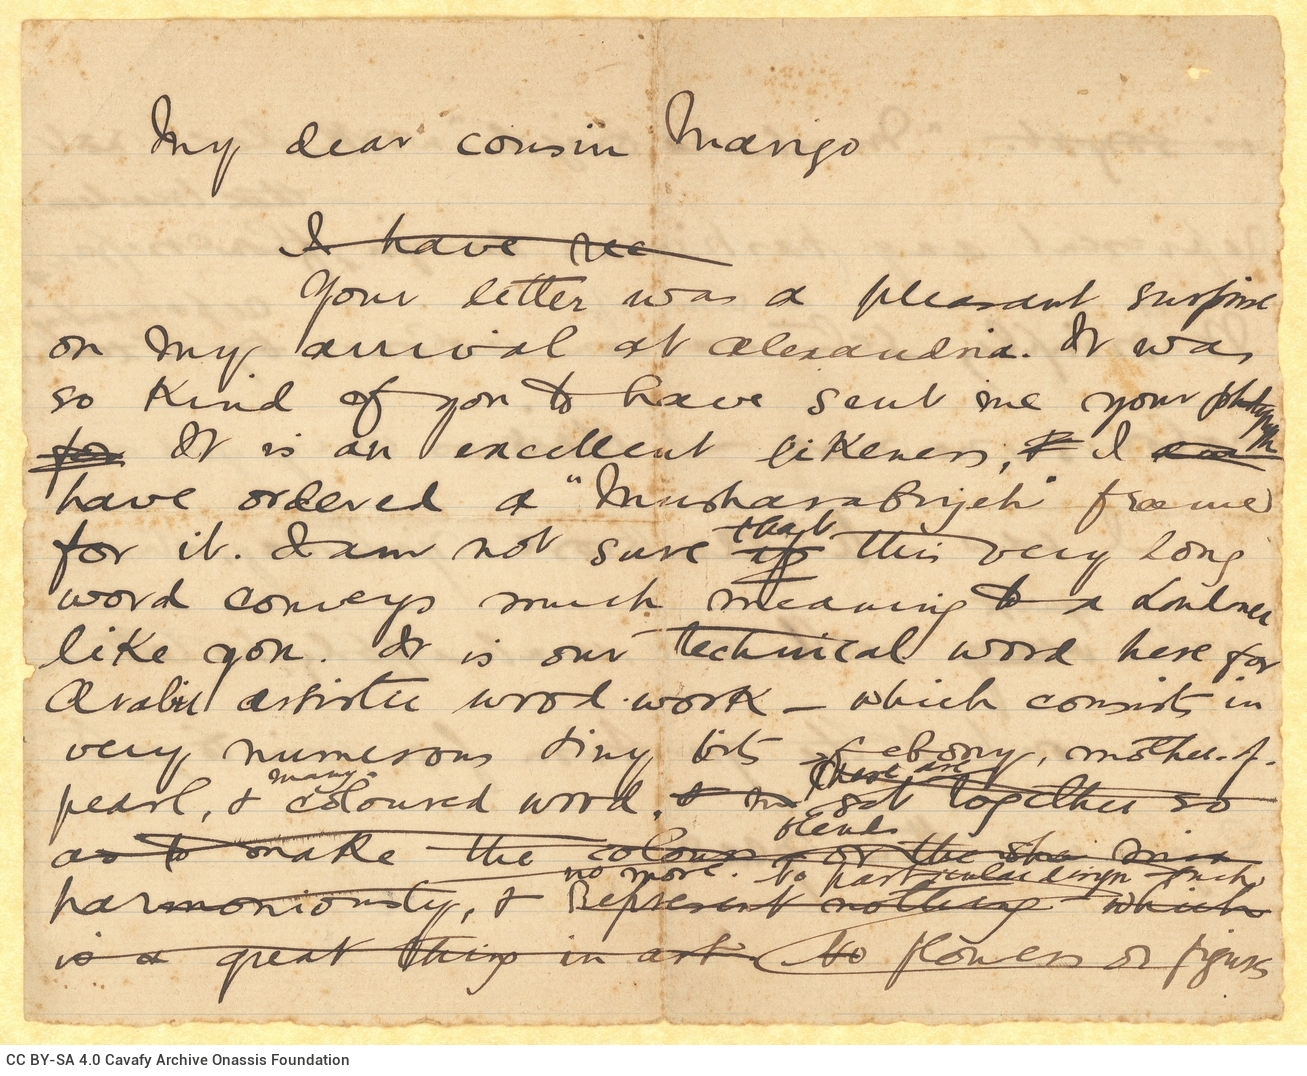 Handwritten draft letter by Cavafy to Maria (Marigo) Cavafy on both sides of half a ruled sheet. Reference to works of Egypti